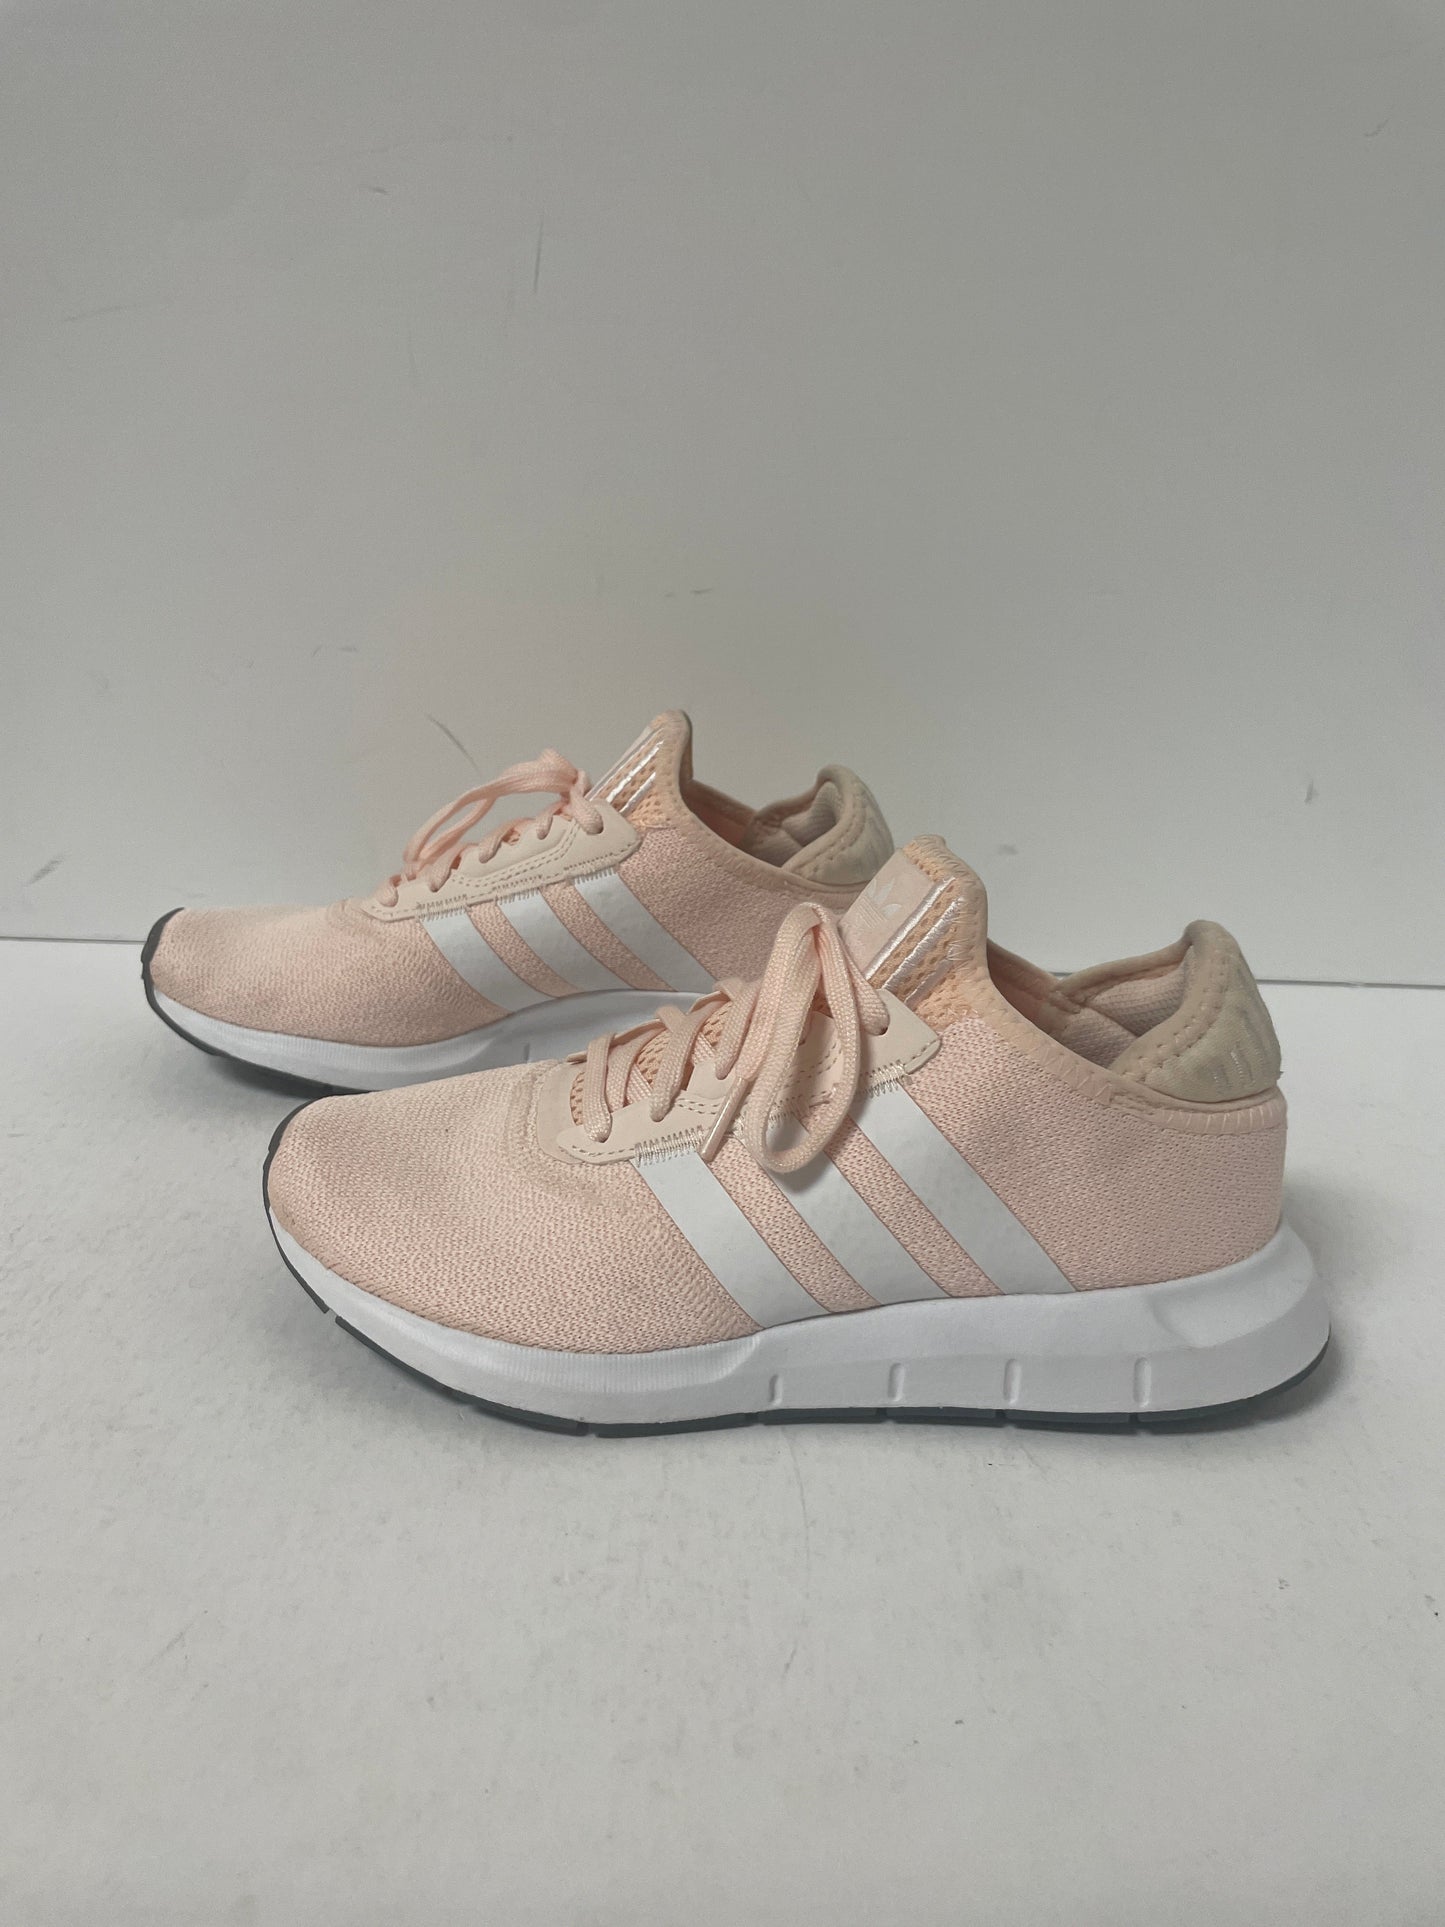 Peach Shoes Athletic Adidas, Size 6.5